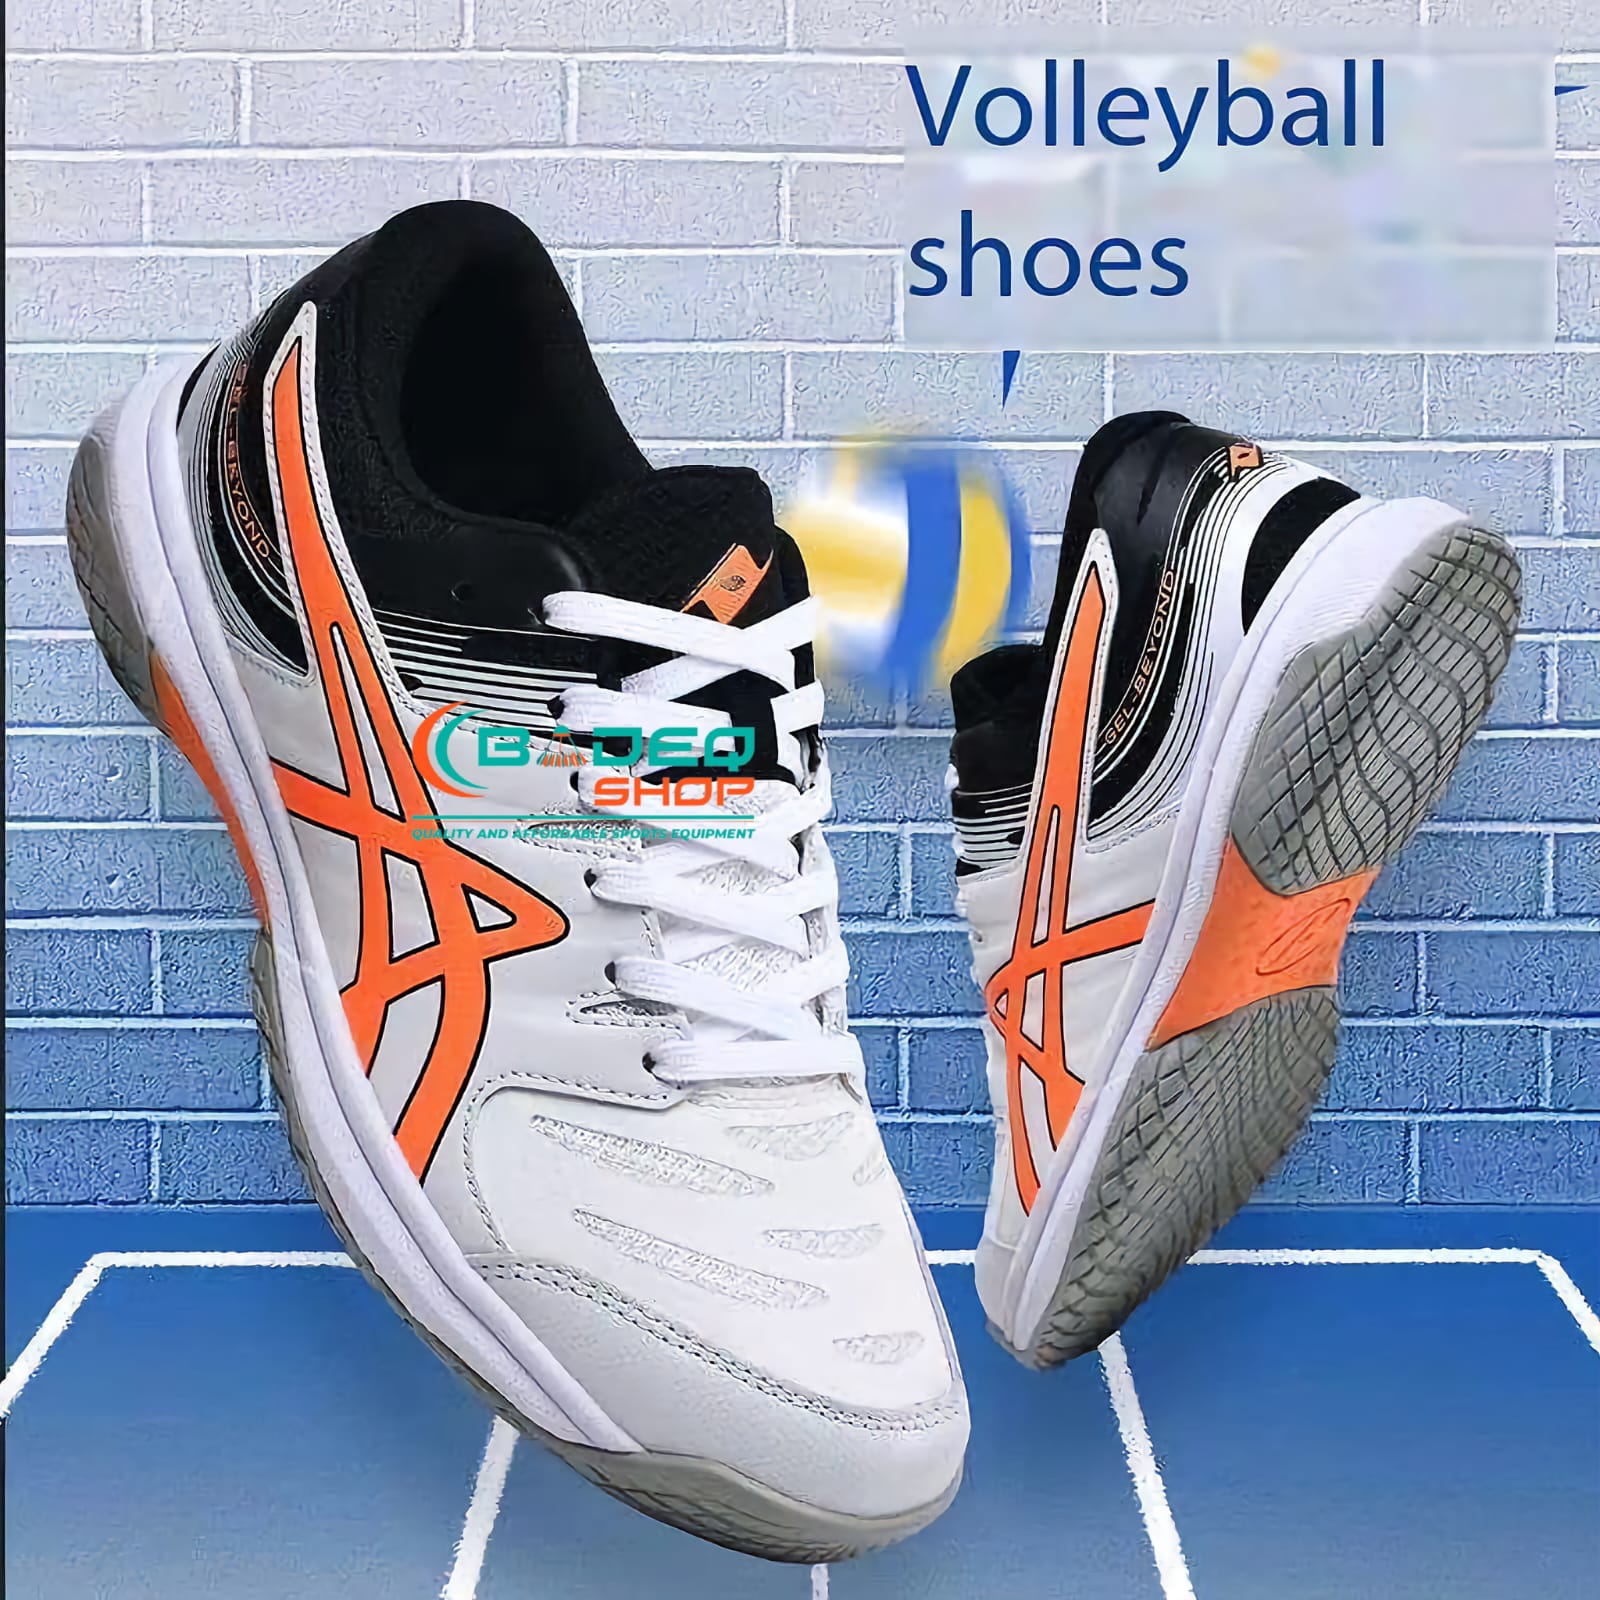 BADEQSHOP , Volleyball shoes